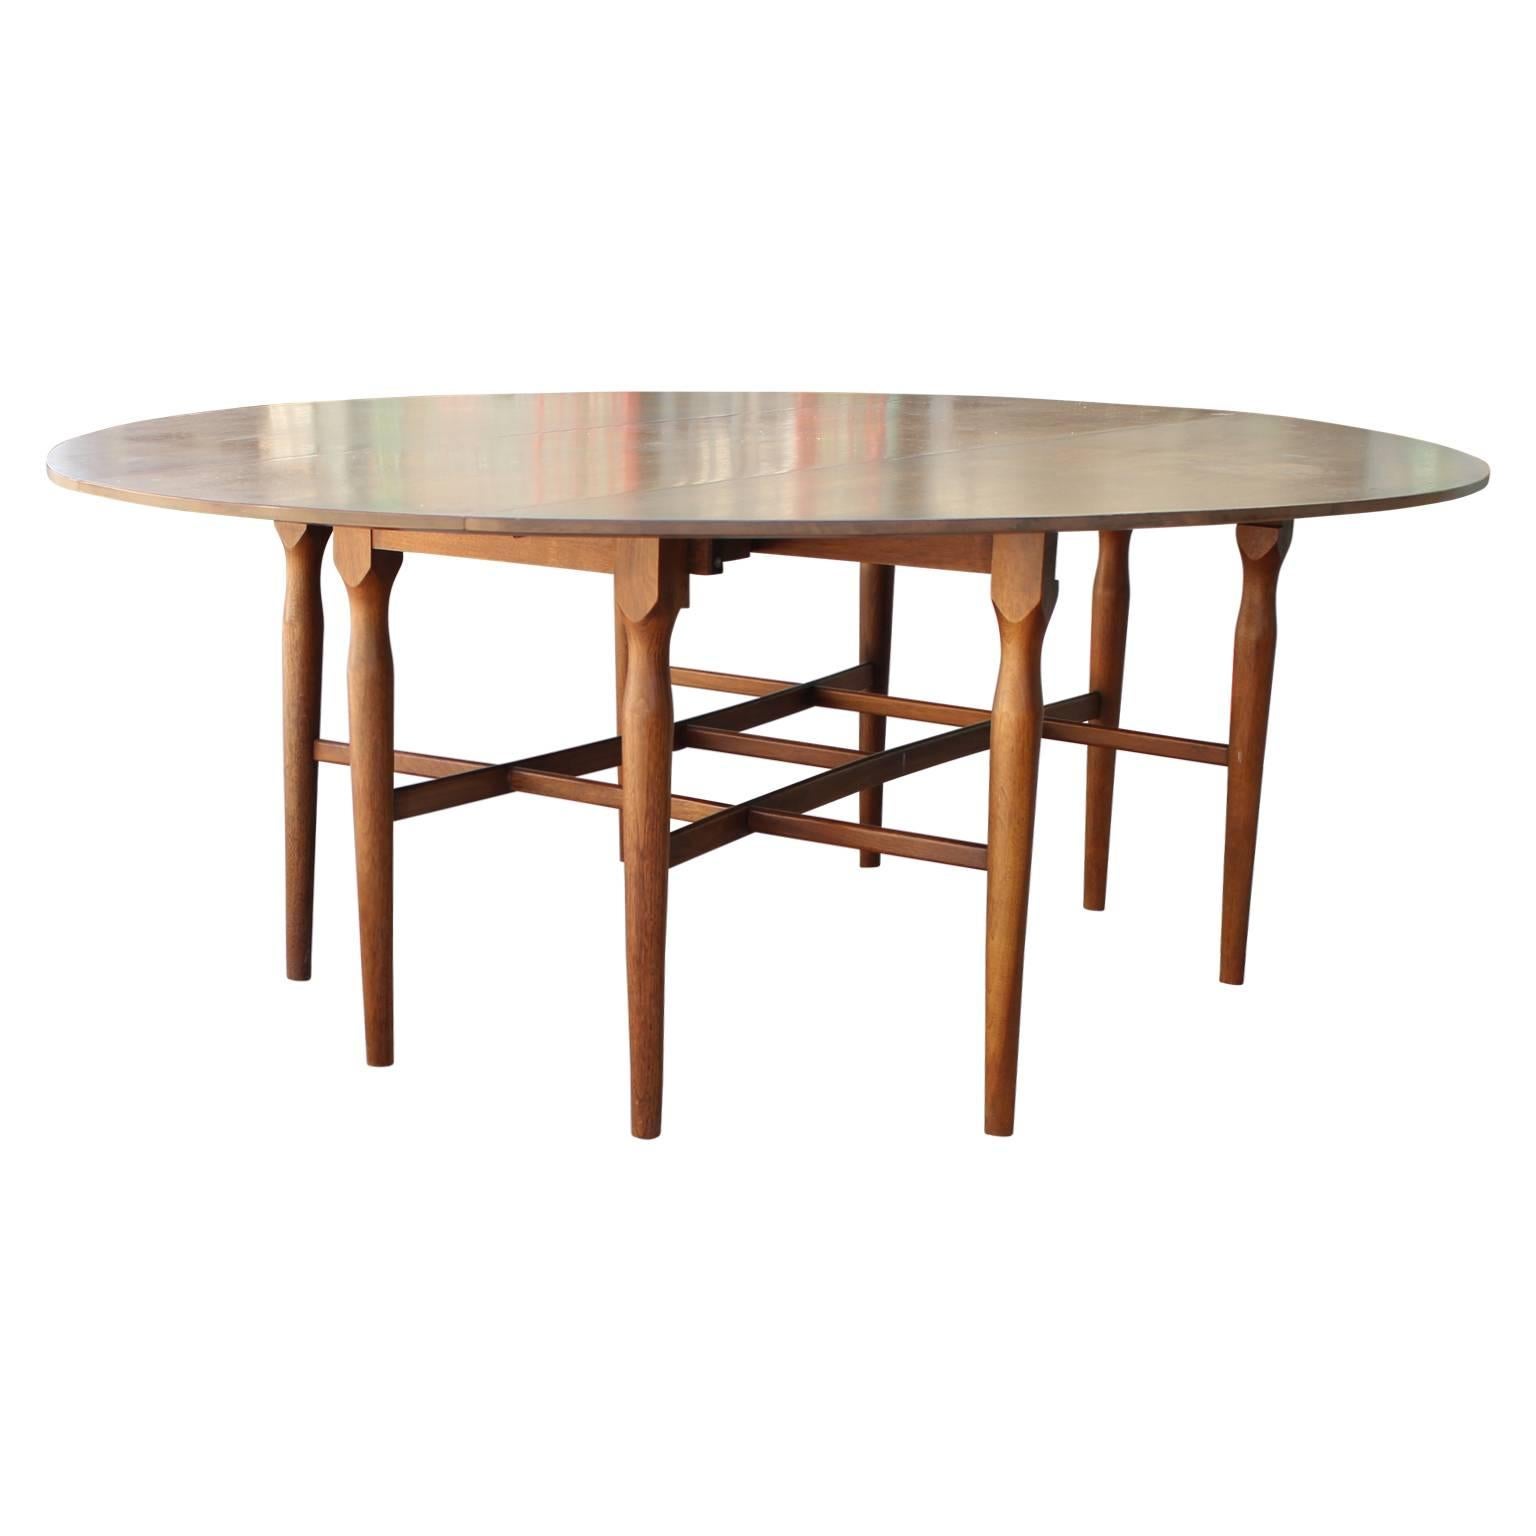 Mid-20th Century Modern Drop-Leaf Gateleg Console or Serving Table by Henredon